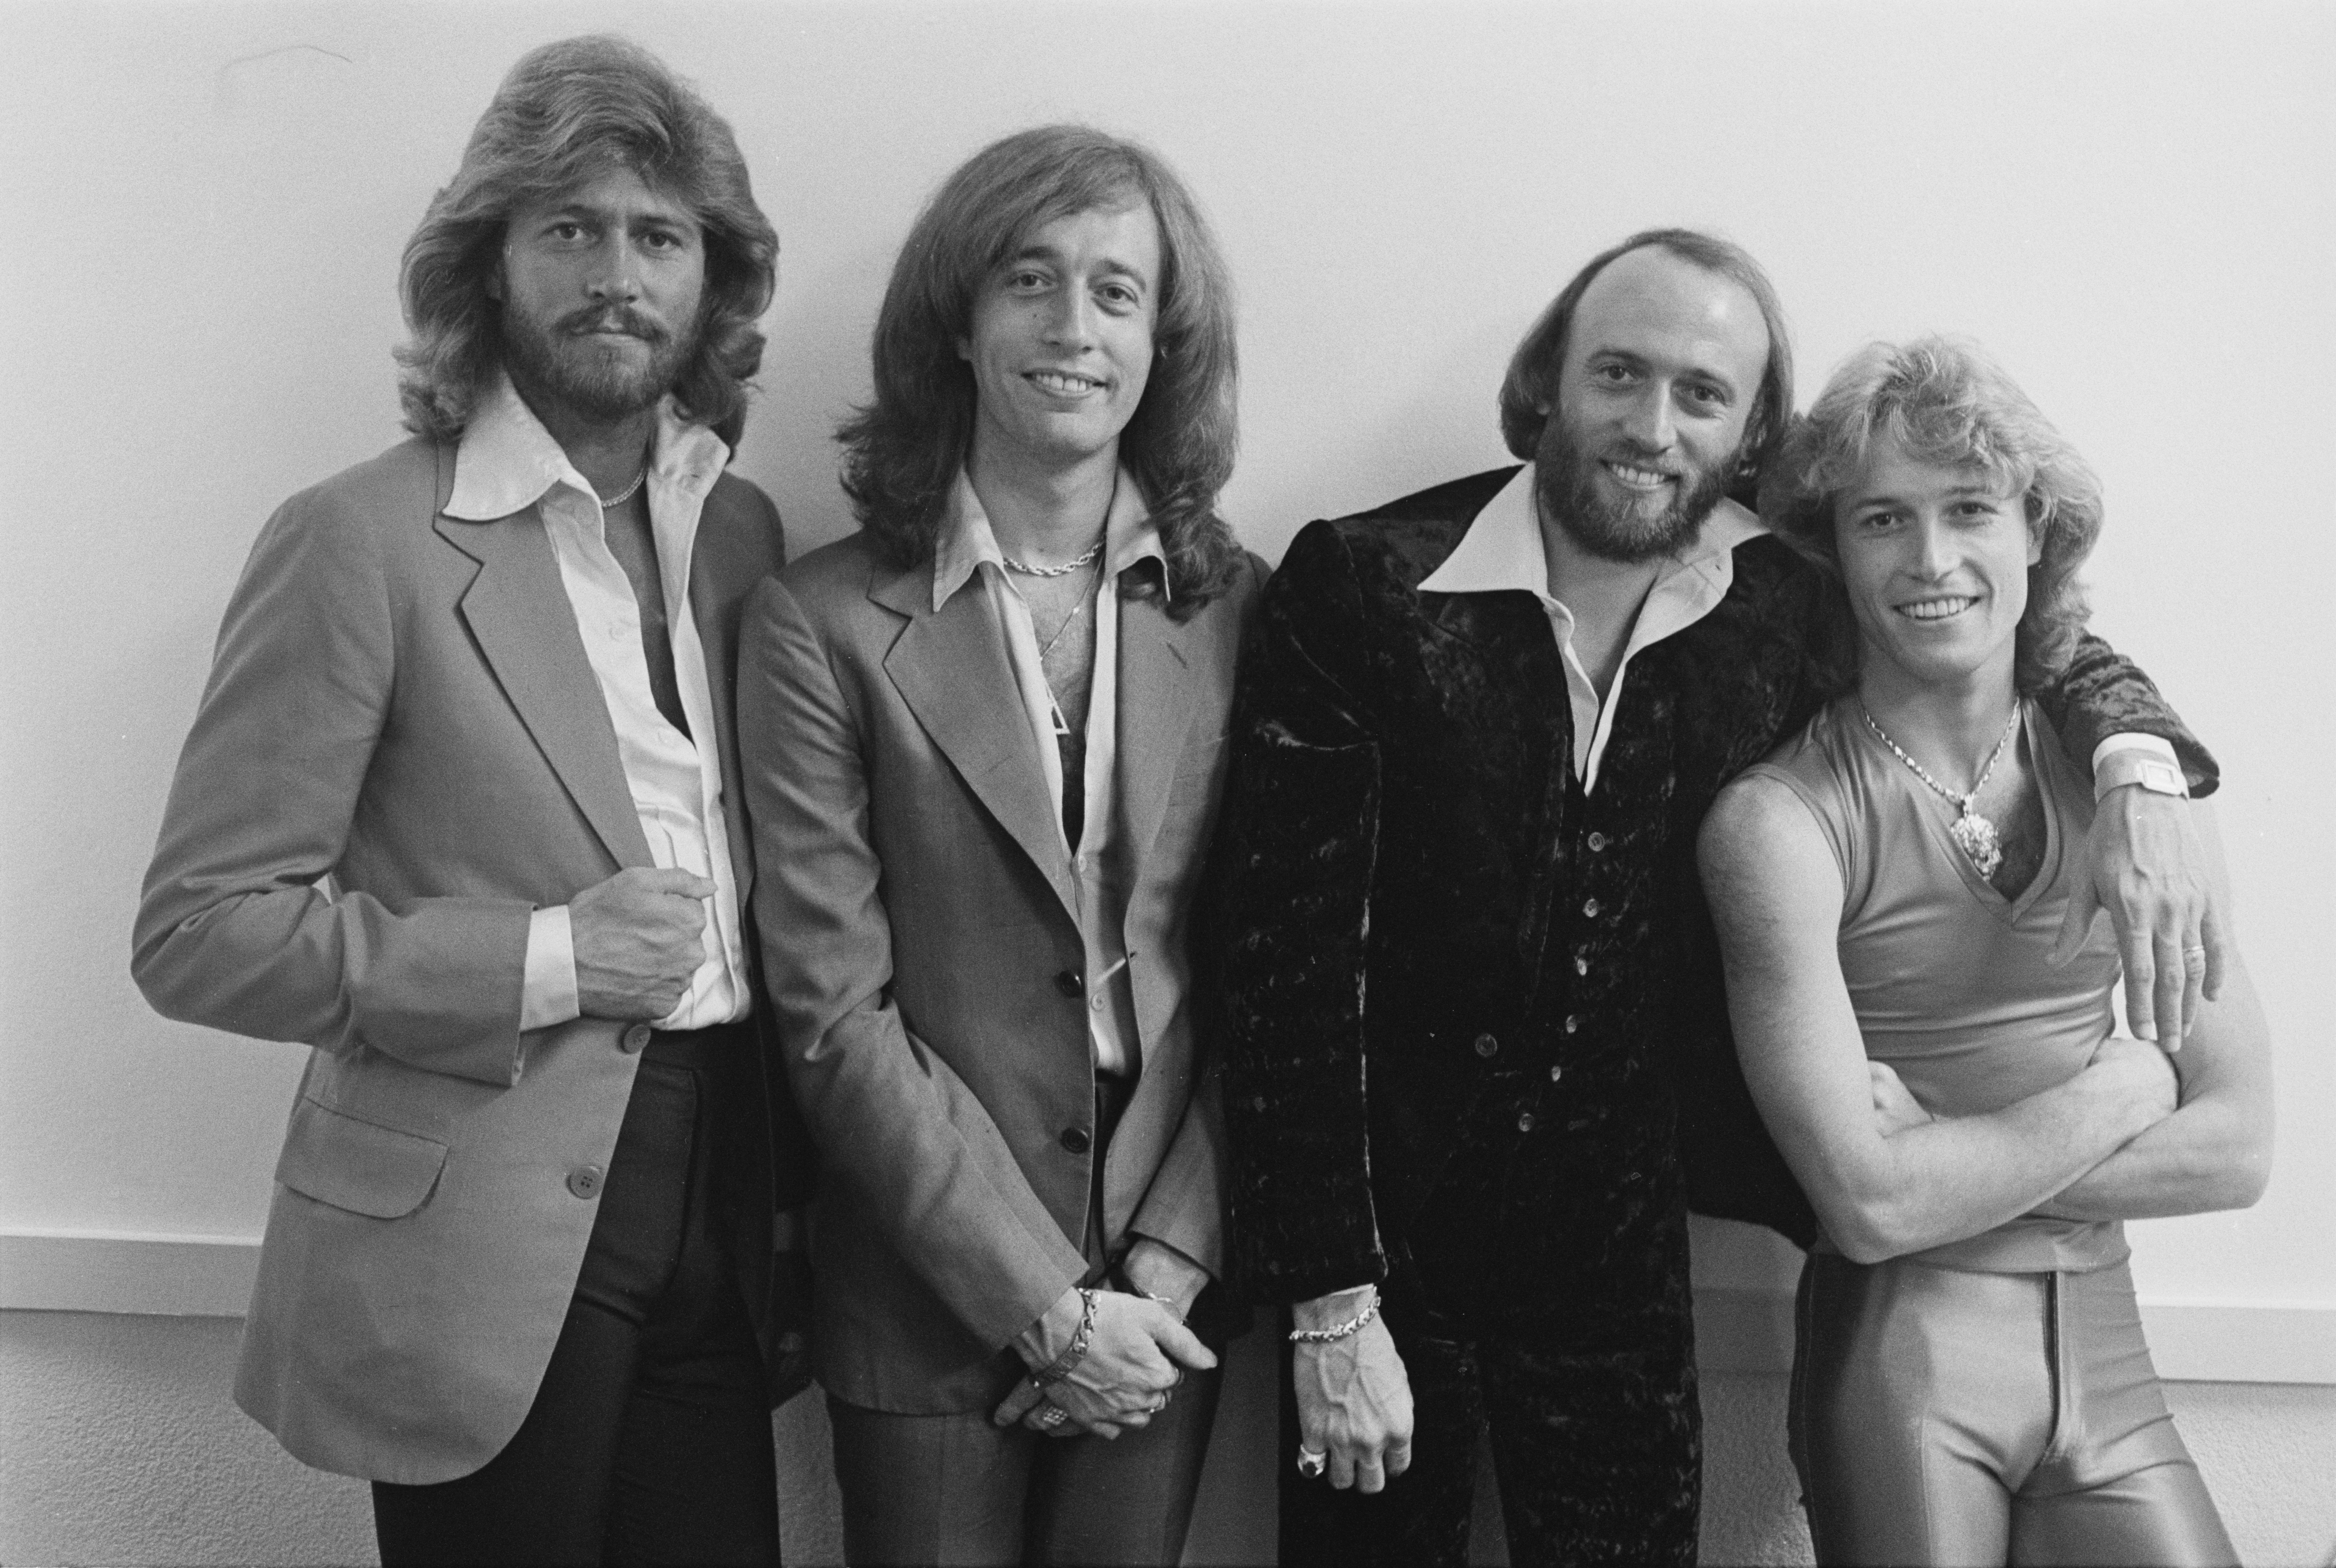 Barry, Robin, Maurice, and Andy Gibb at the NARM convention and award ceremony in Hollywood, 1979 | Source: Getty Images